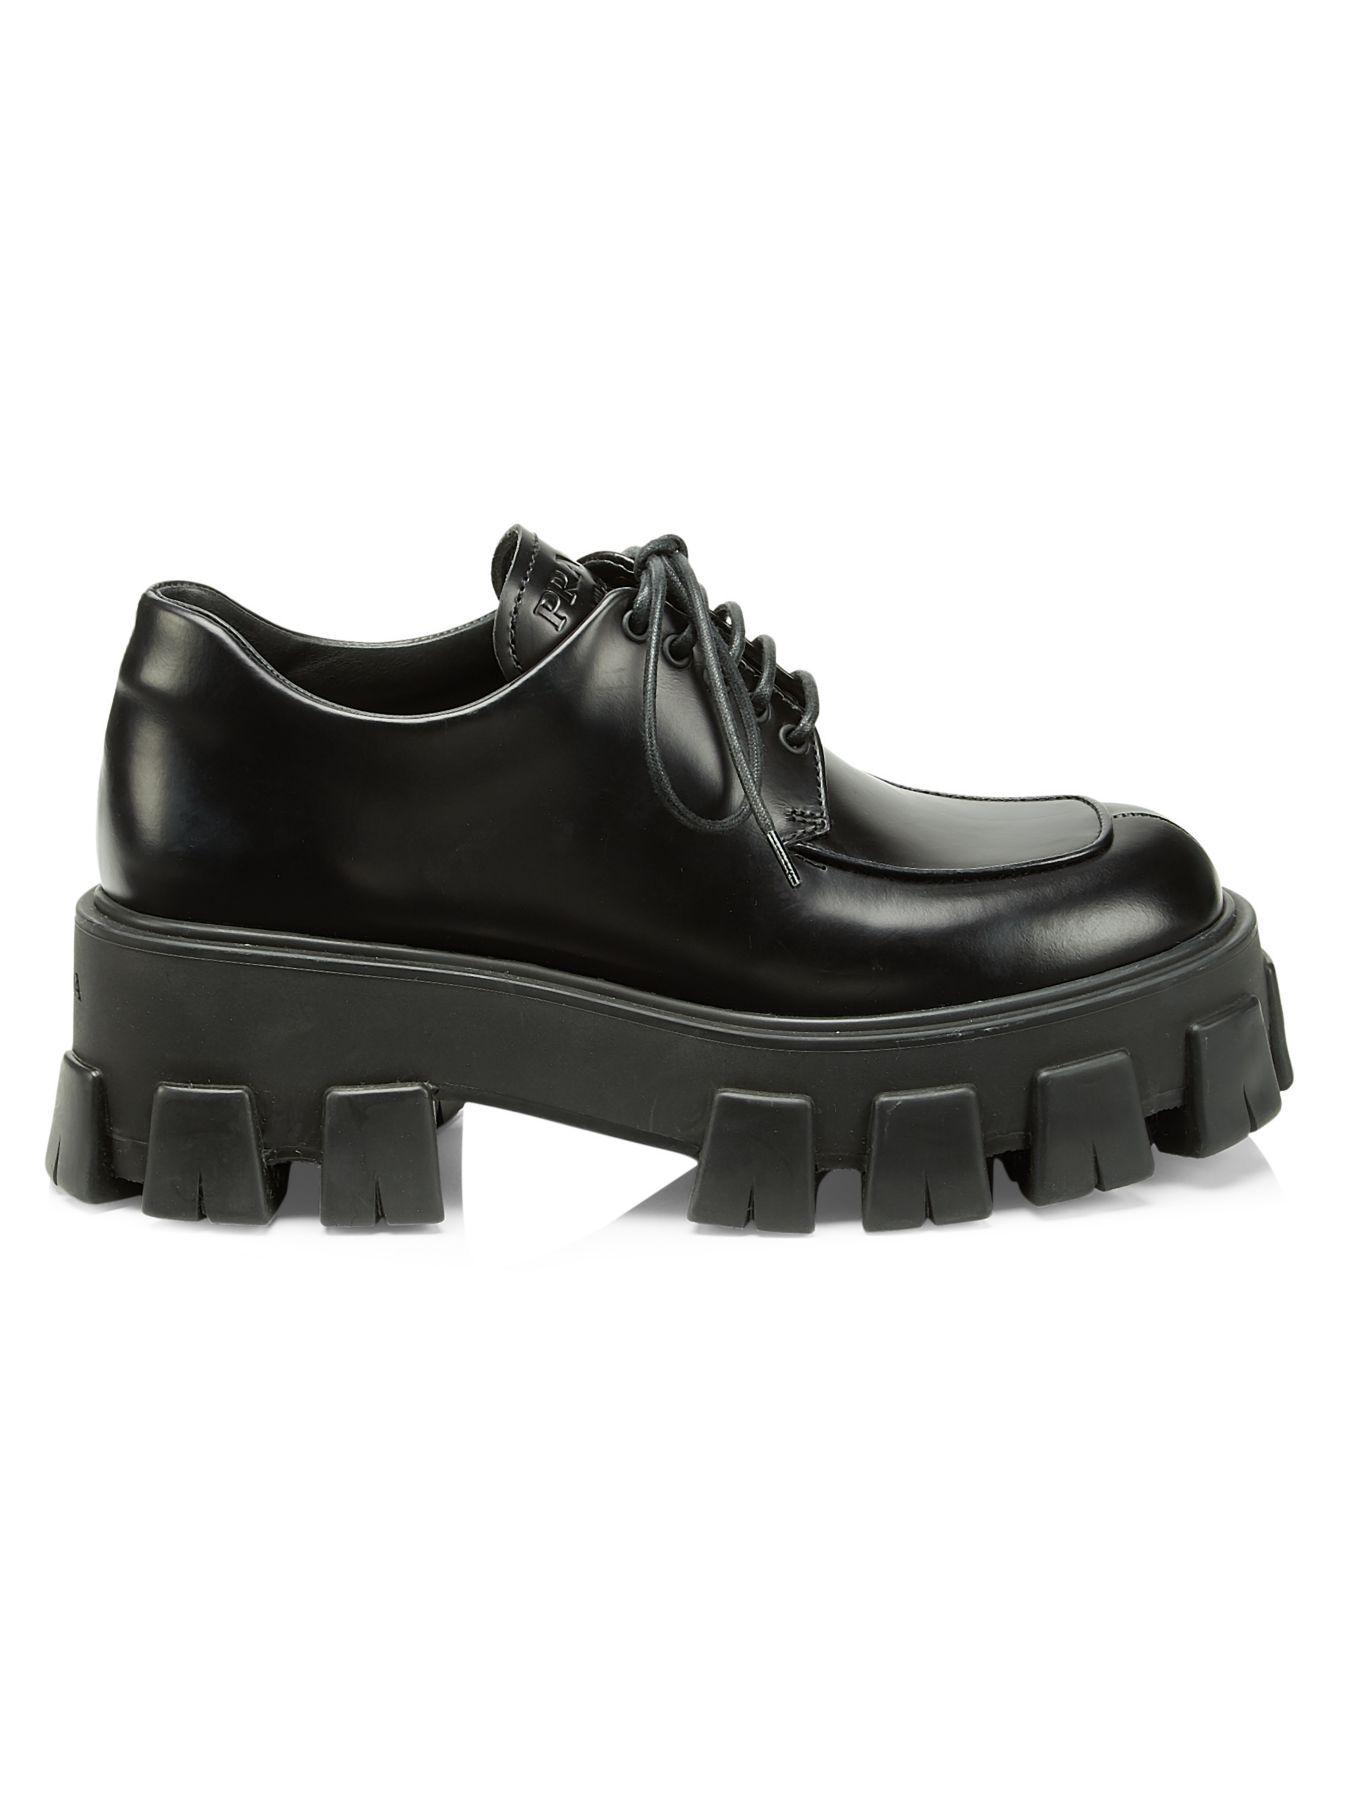 Booted Creepers: Prada Creepers Boot